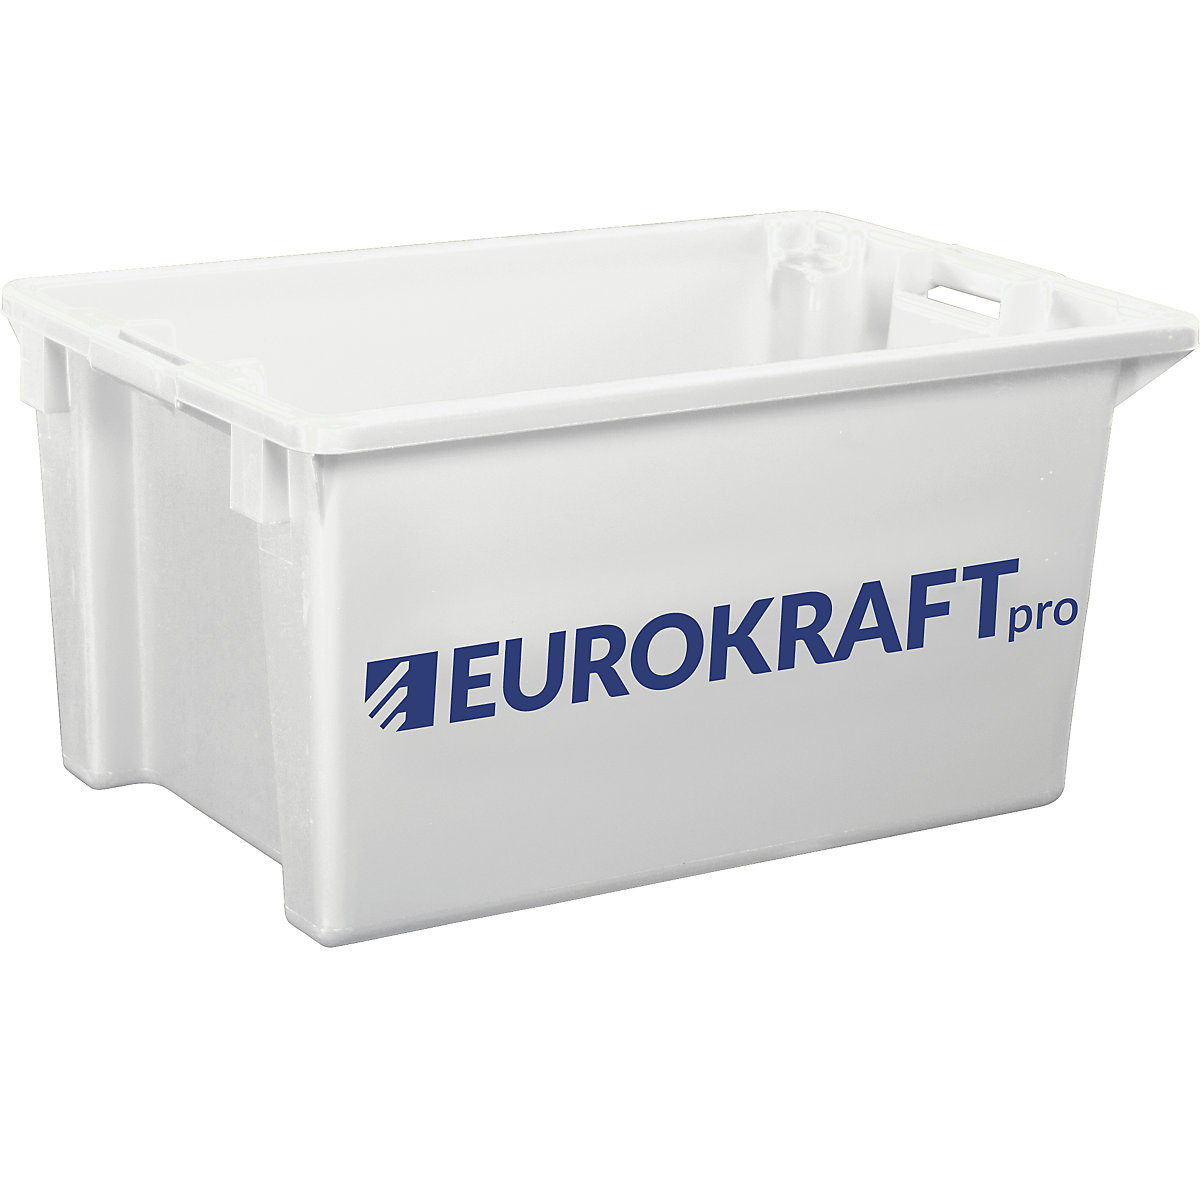 EUROKRAFTpro – Stack/nest container made of polypropylene suitable for foodstuffs, 70 l capacity, pack of 2, solid walls and base, natural colour